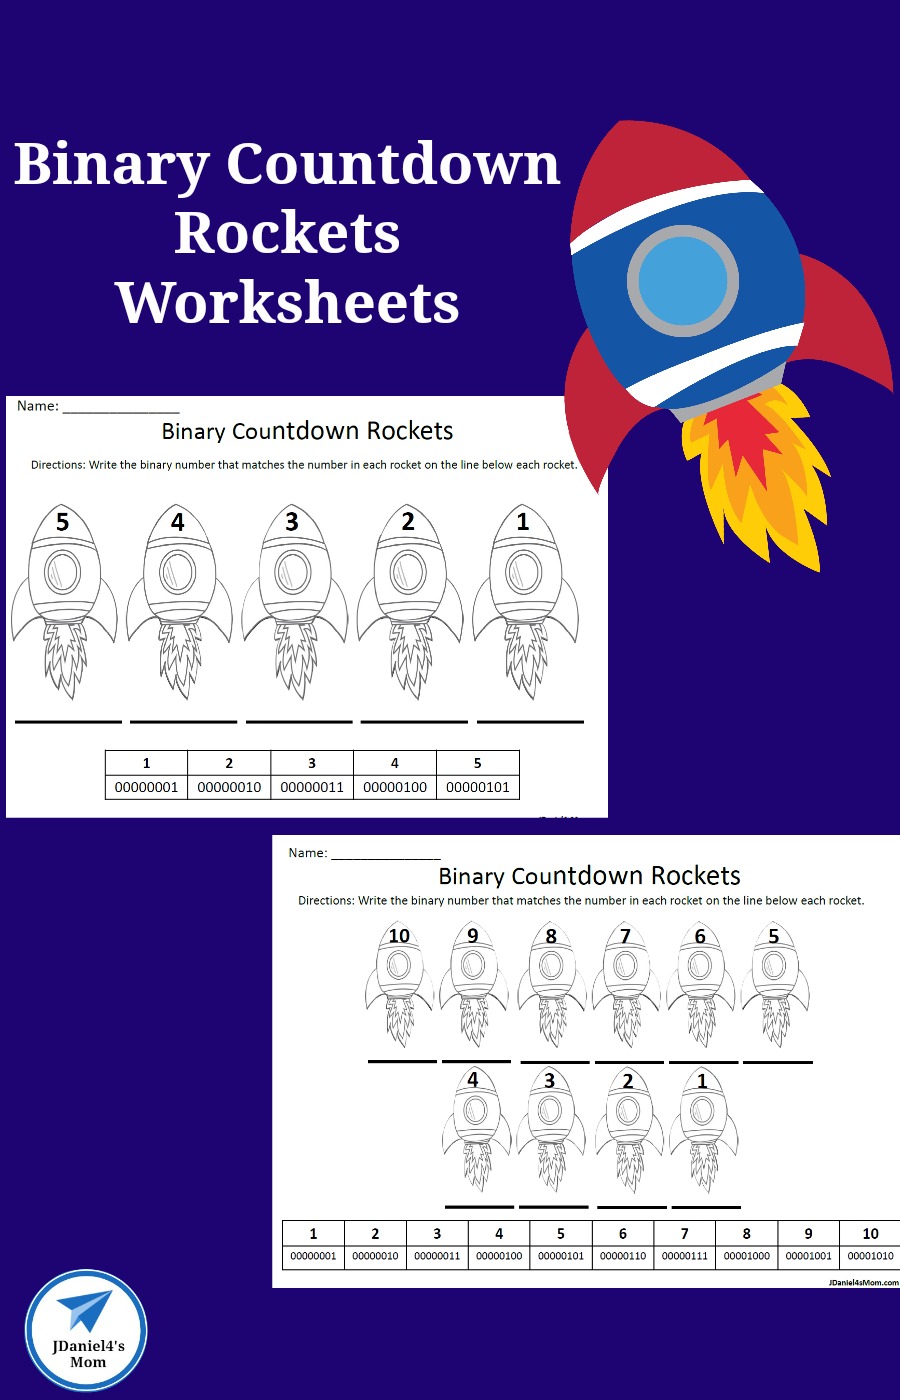 Your children will have fun exploring binary numbers as they complete these countdown rocket worksheets. #freeworksheet #jdaniel4smom #rockets #countingdown #coding #binarycode